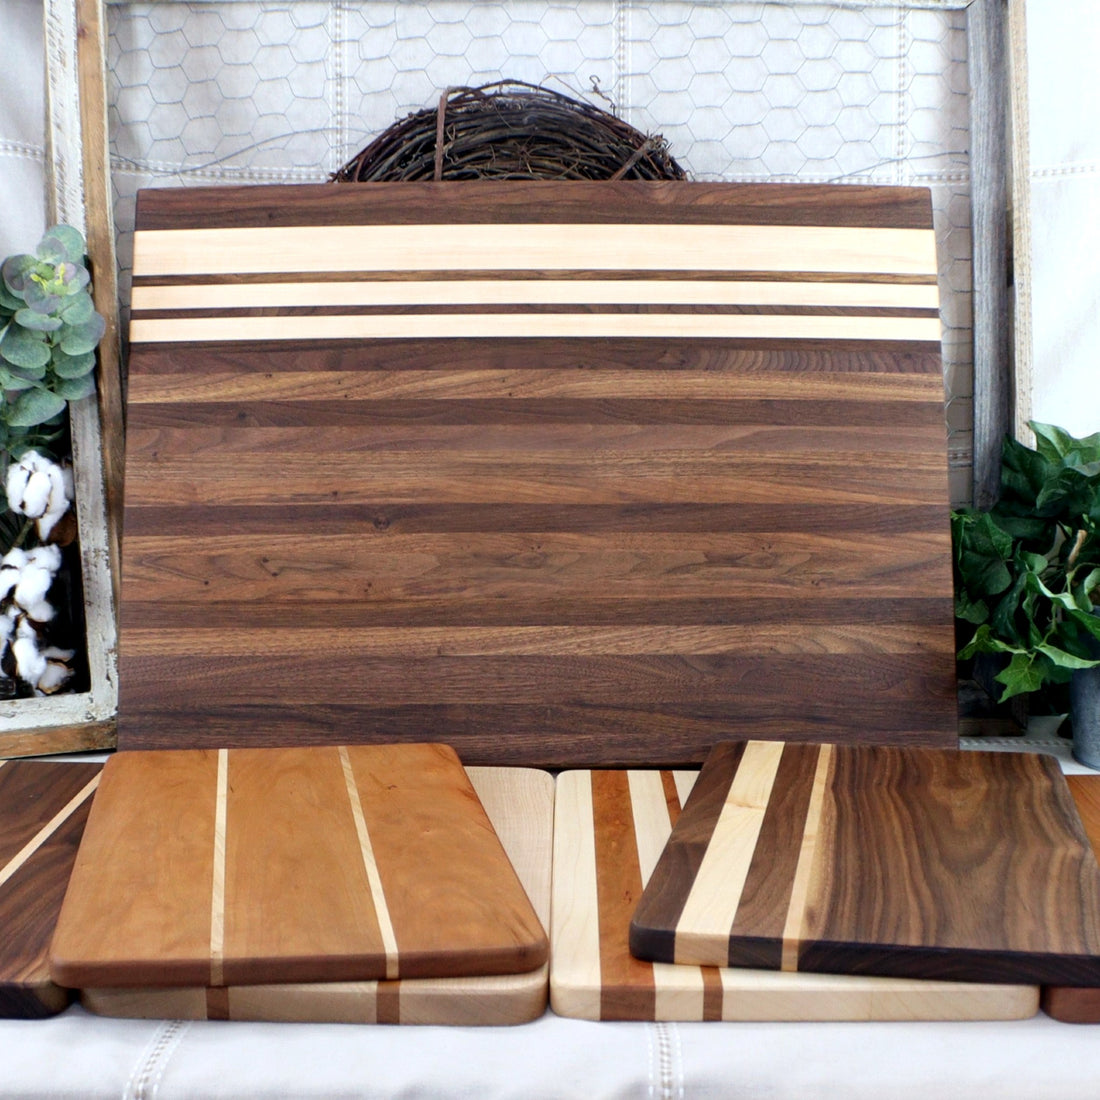 Crafted To Last: Explore the Durability of Our Handmade Wooden Cutting Boards